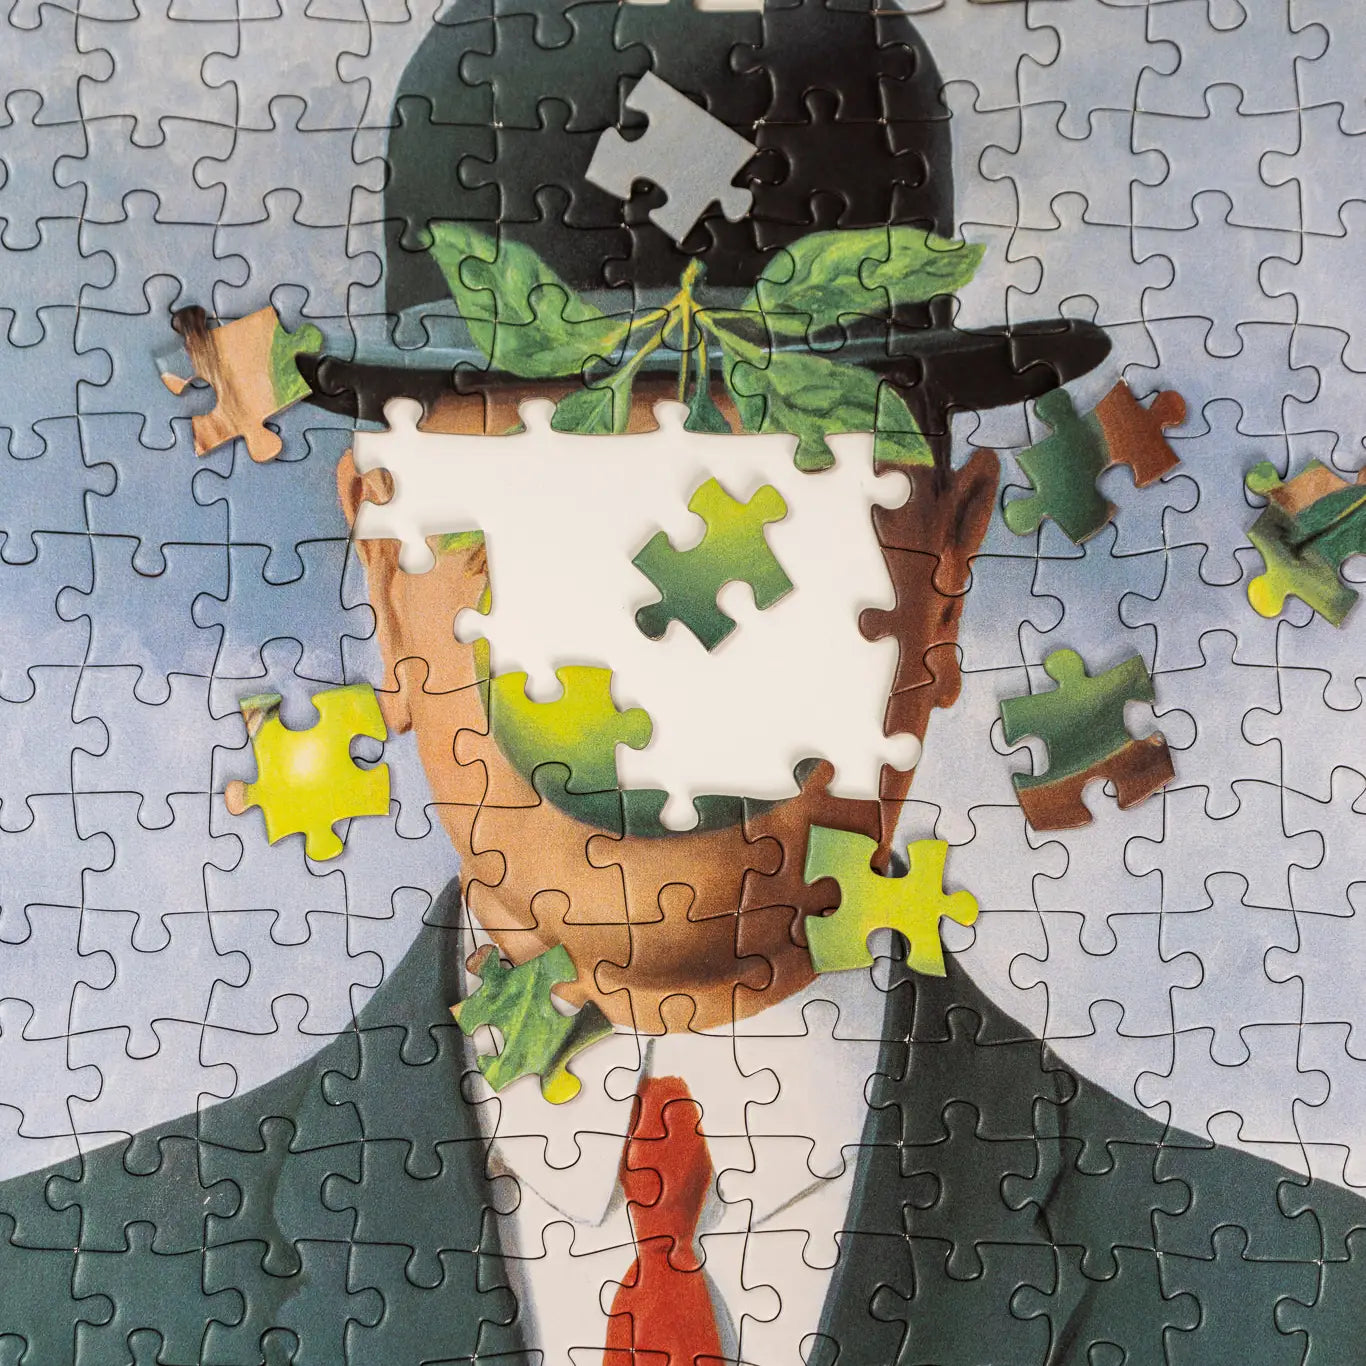 René Magritte - Son of Man Puzzle Did you know: This painting was a featured element in the plot of the 1999 movie (remake), The Thomas Crown Affair, with Pierce Brosnan and Rene Russo. If you're an art lover - you MUST watch it!